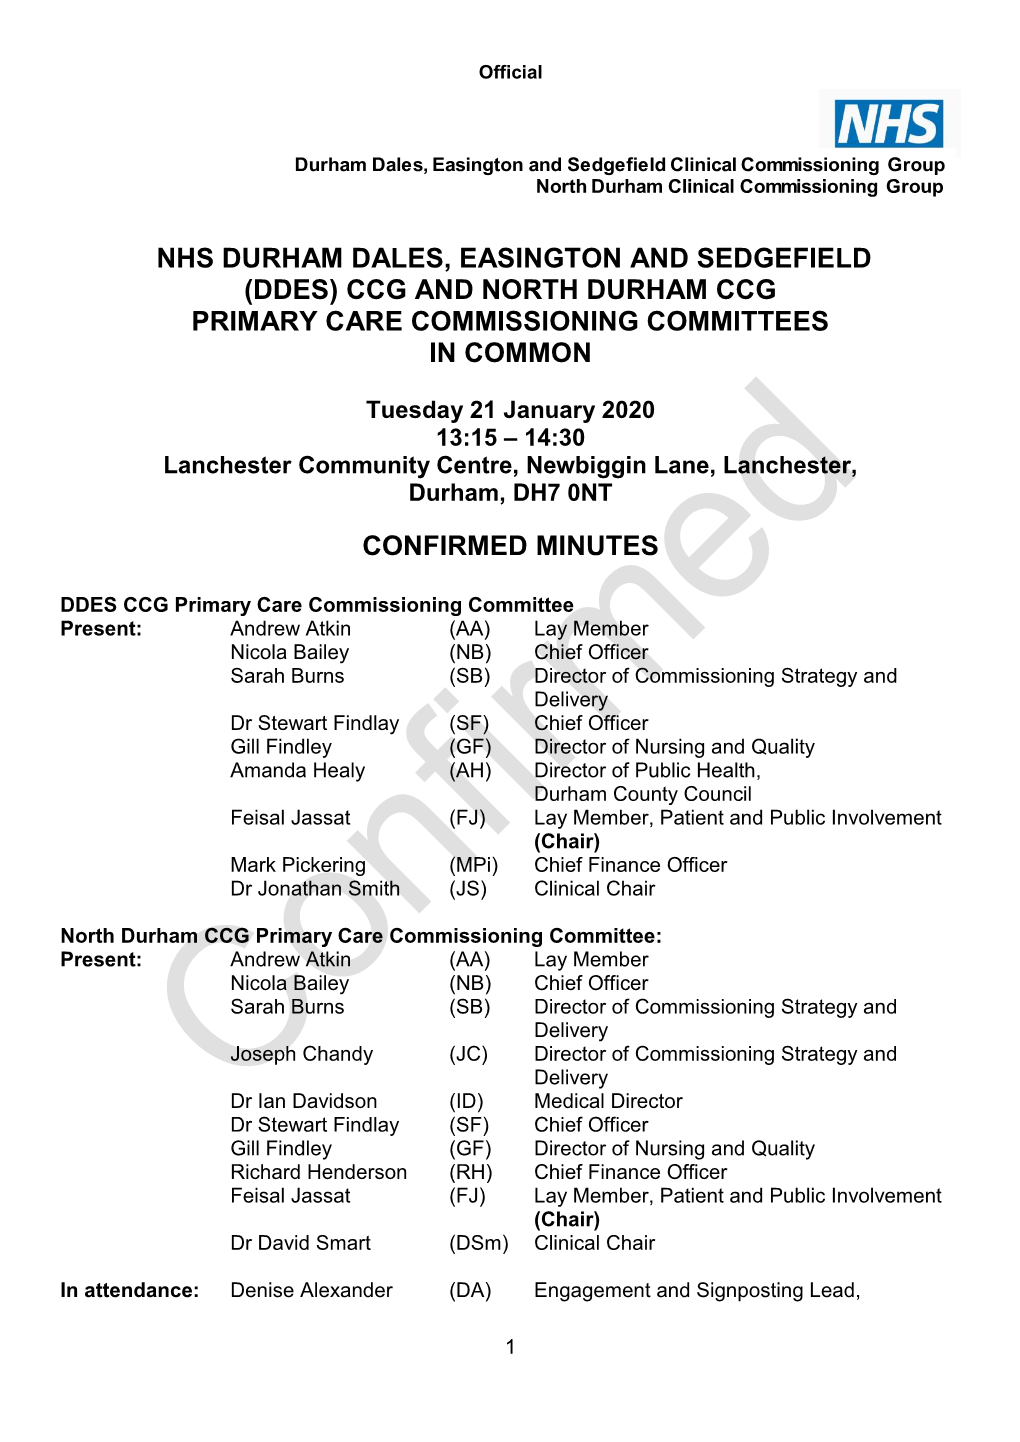 Nhs Durham Dales, Easington and Sedgefield (Ddes) Ccg and North Durham Ccg Primary Care Commissioning Committees in Common